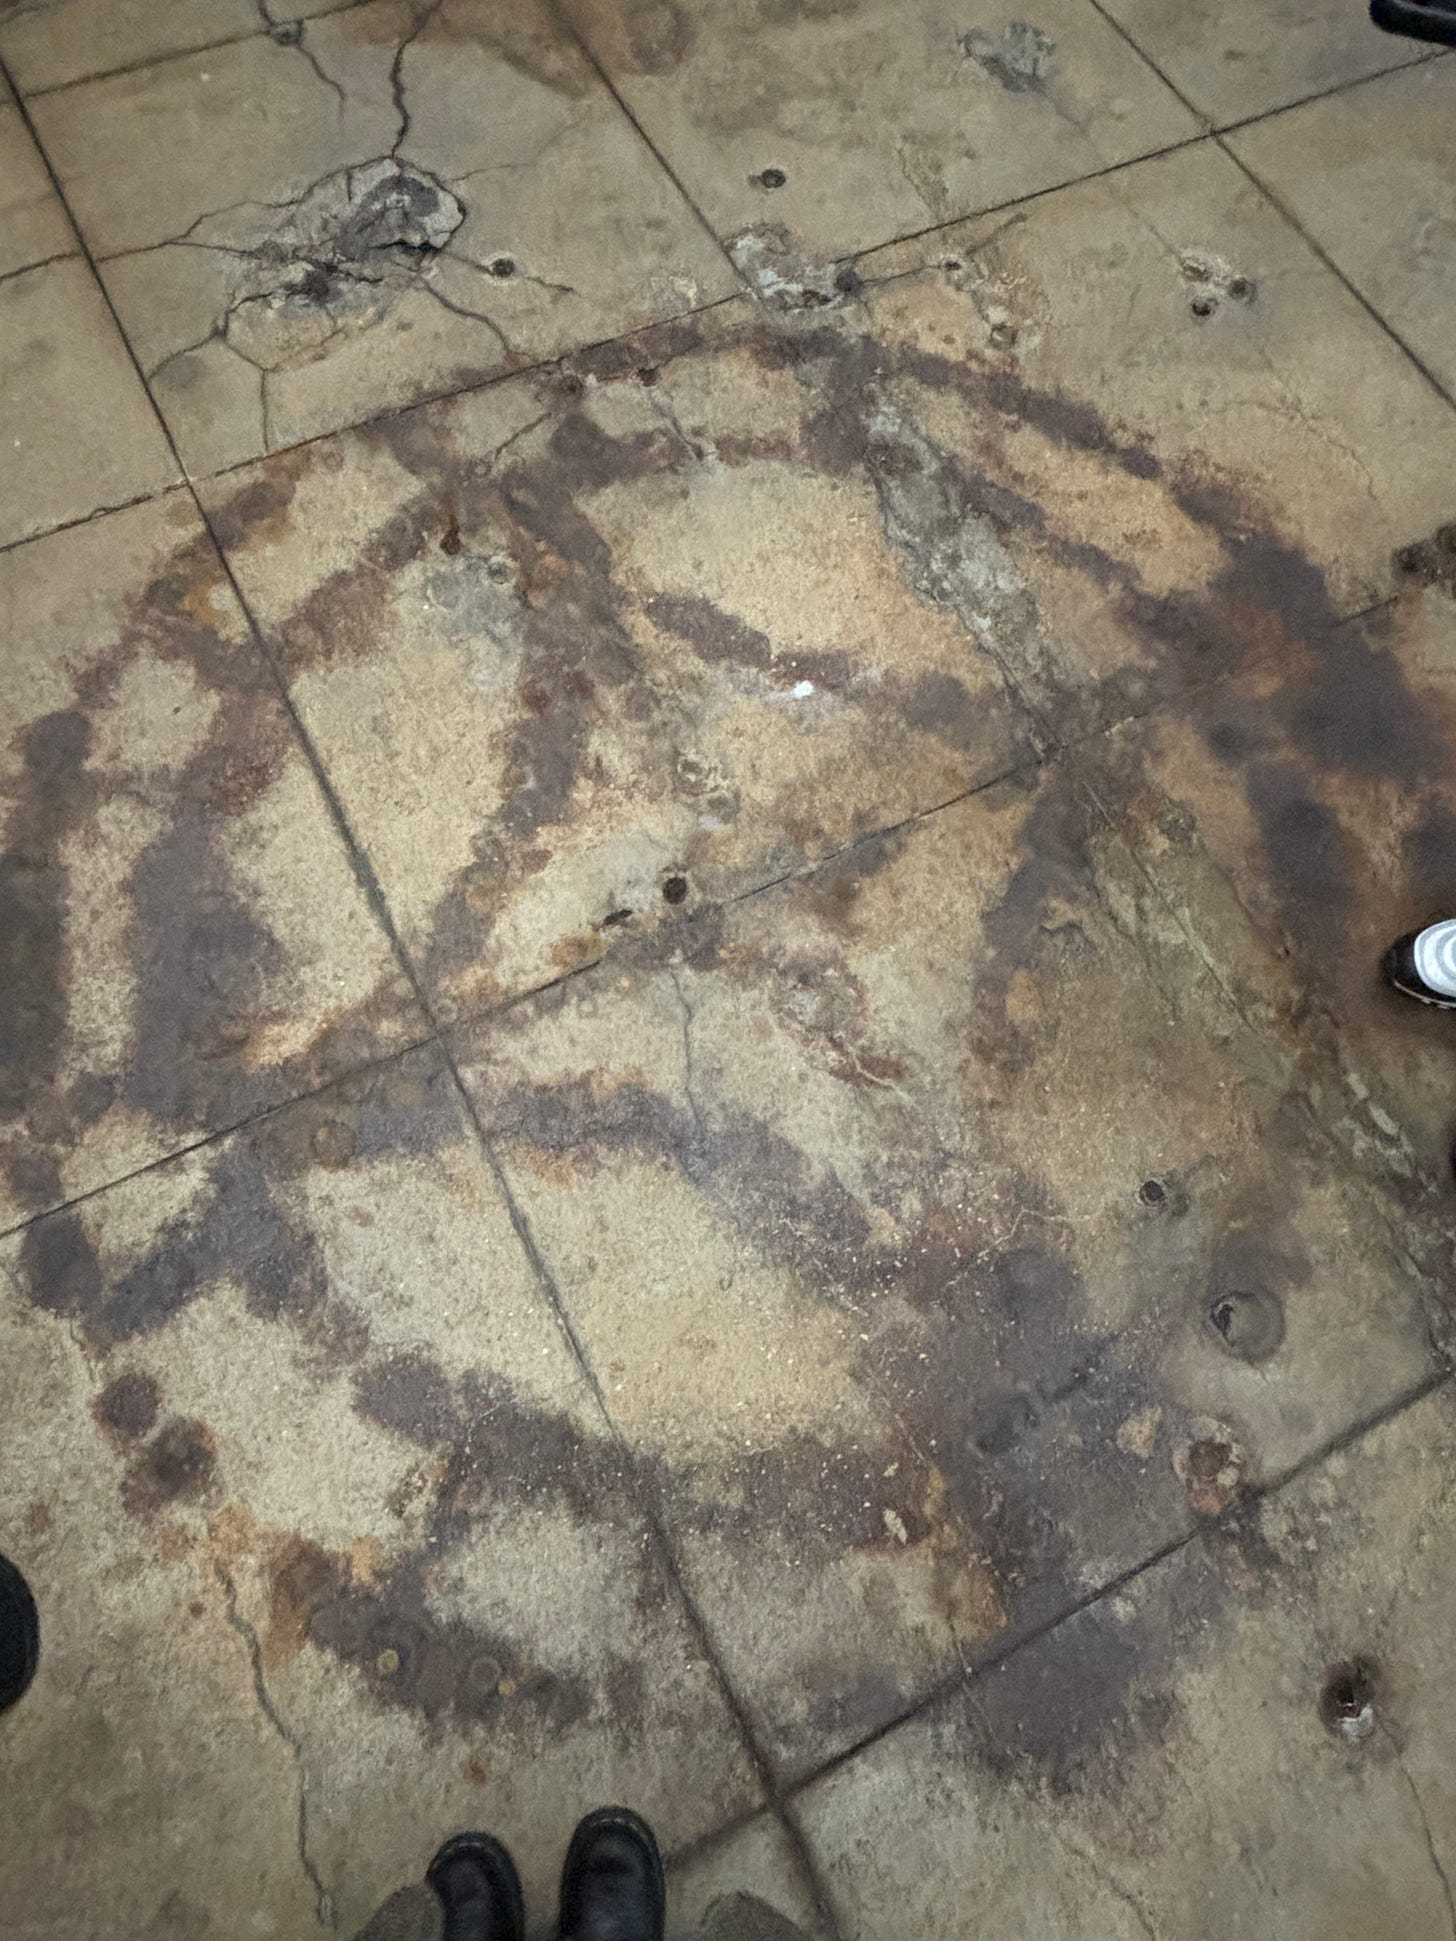 The floor beneath the skylight. The pattern has been burned into the ground by sun and rain.